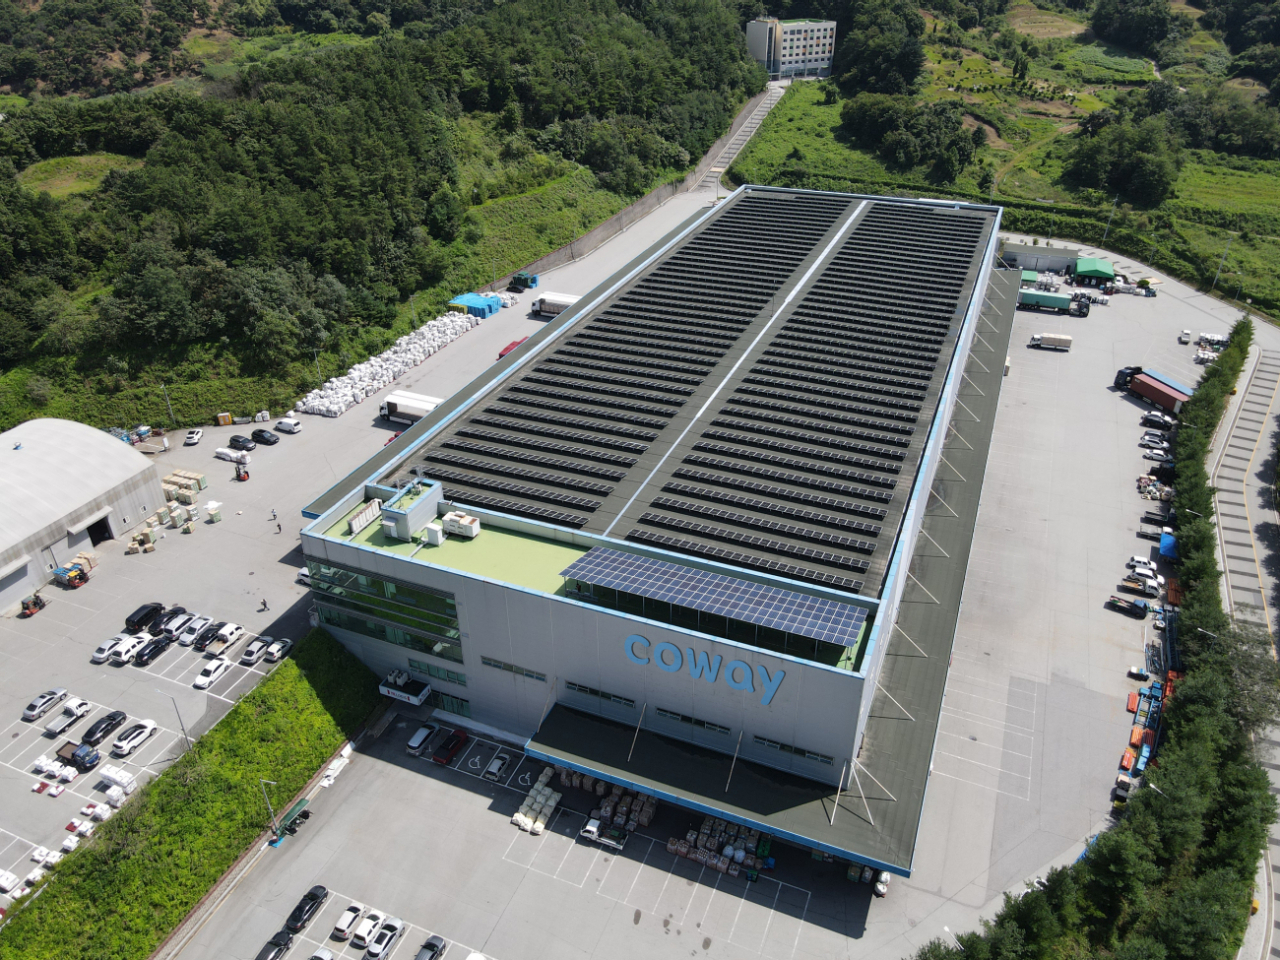 Coway's solar power plant on the roof of its Yugu Distribution Center, located in Gongju, South Chungcheong Province. (Coway)